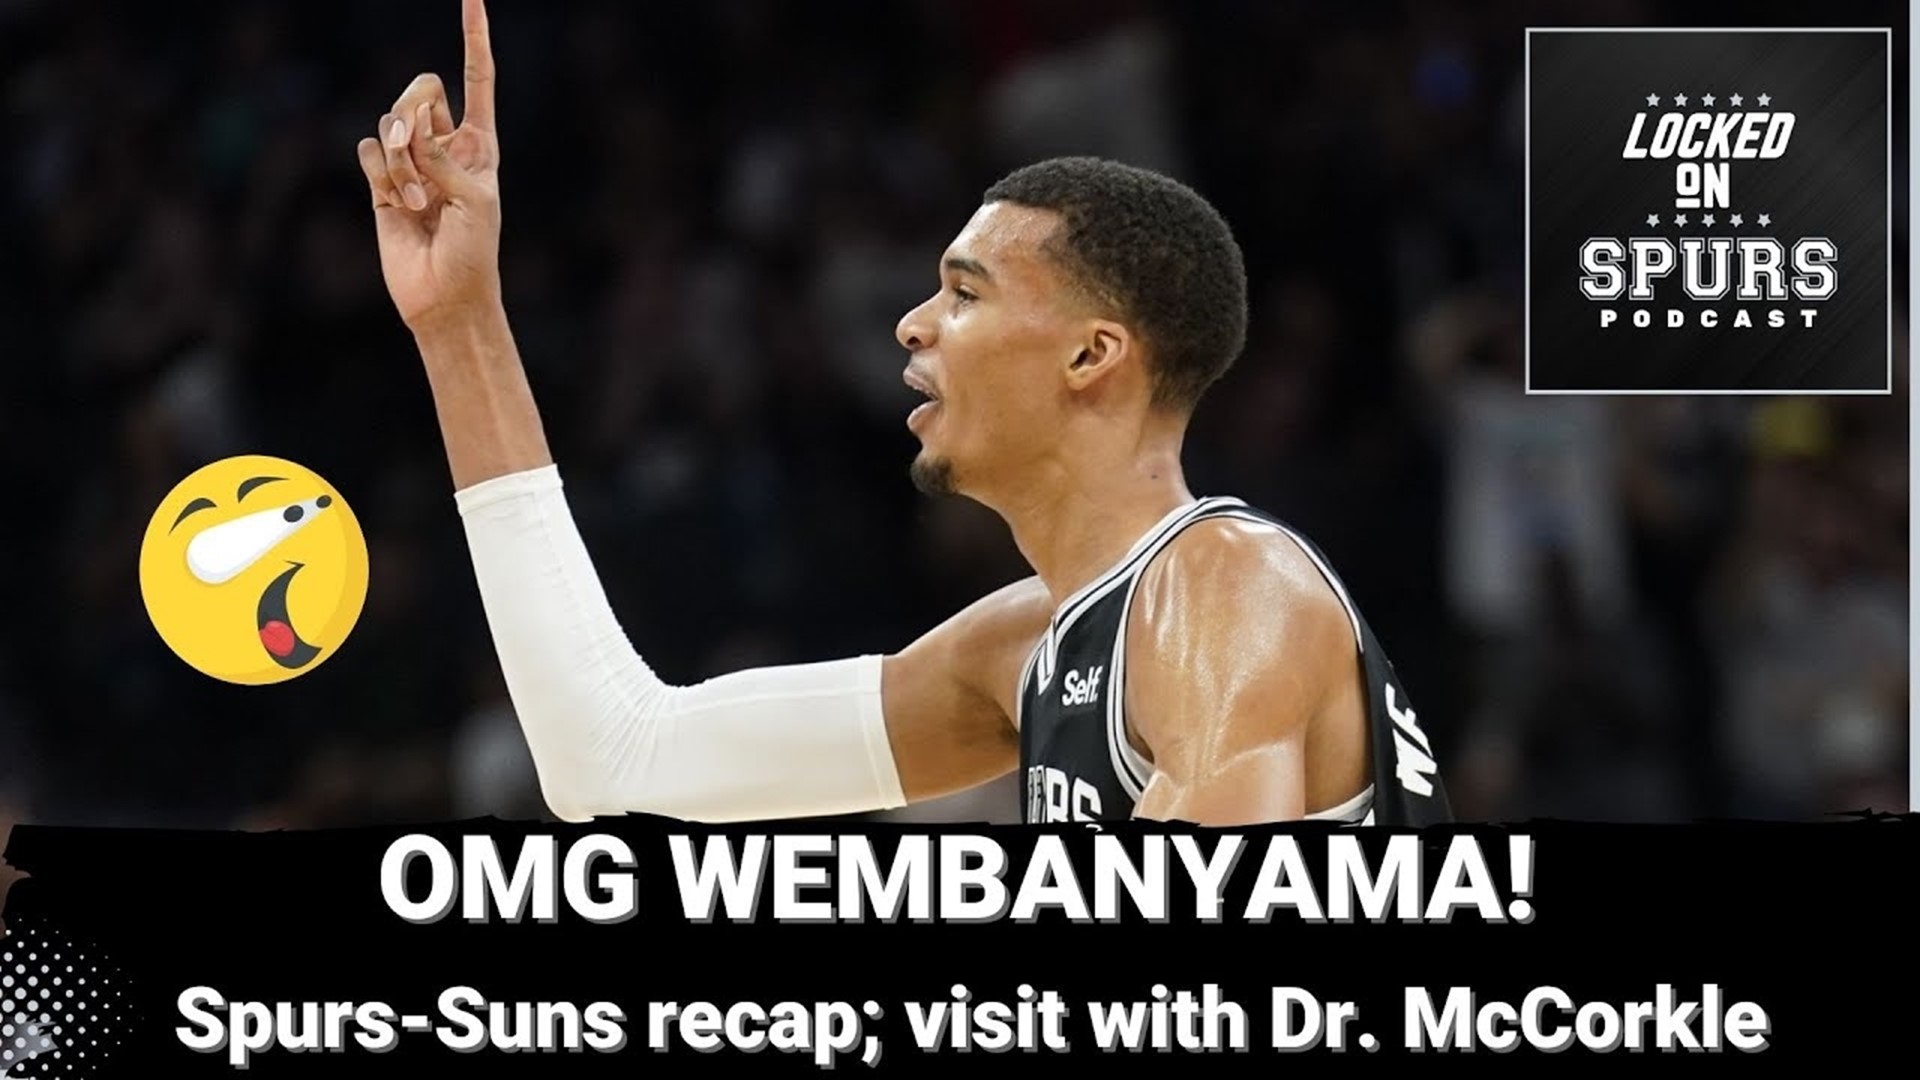 On this episode of Locked On Spurs, host Jeff Garcia recaps the San Antonio Spurs' win over the Suns and gushes over Victor Wembanyama's incredible performance.